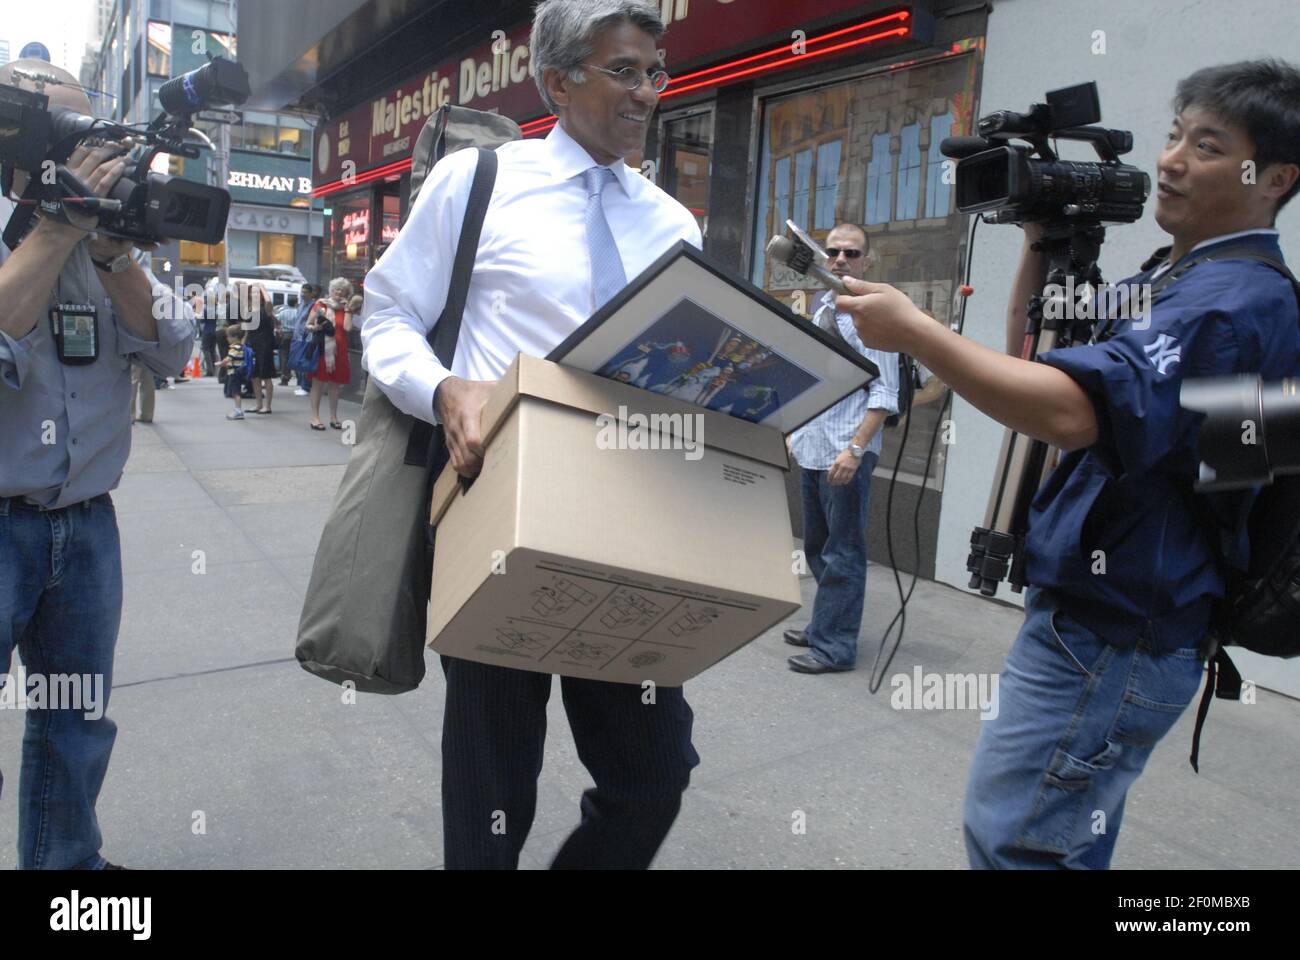 https://c8.alamy.com/comp/2F0MBXB/an-employee-of-lehman-brothers-holdings-inc-carries-a-box-out-of-the-lehman-brothers-global-headquarters-in-new-york-on-monday-september-15-2008-september-15-2016-is-the-8th-anniversary-of-the-collapse-of-lehman-bros-precipitating-the-great-recession-photo-by-richard-b-levine-please-use-credit-from-credit-field-2F0MBXB.jpg